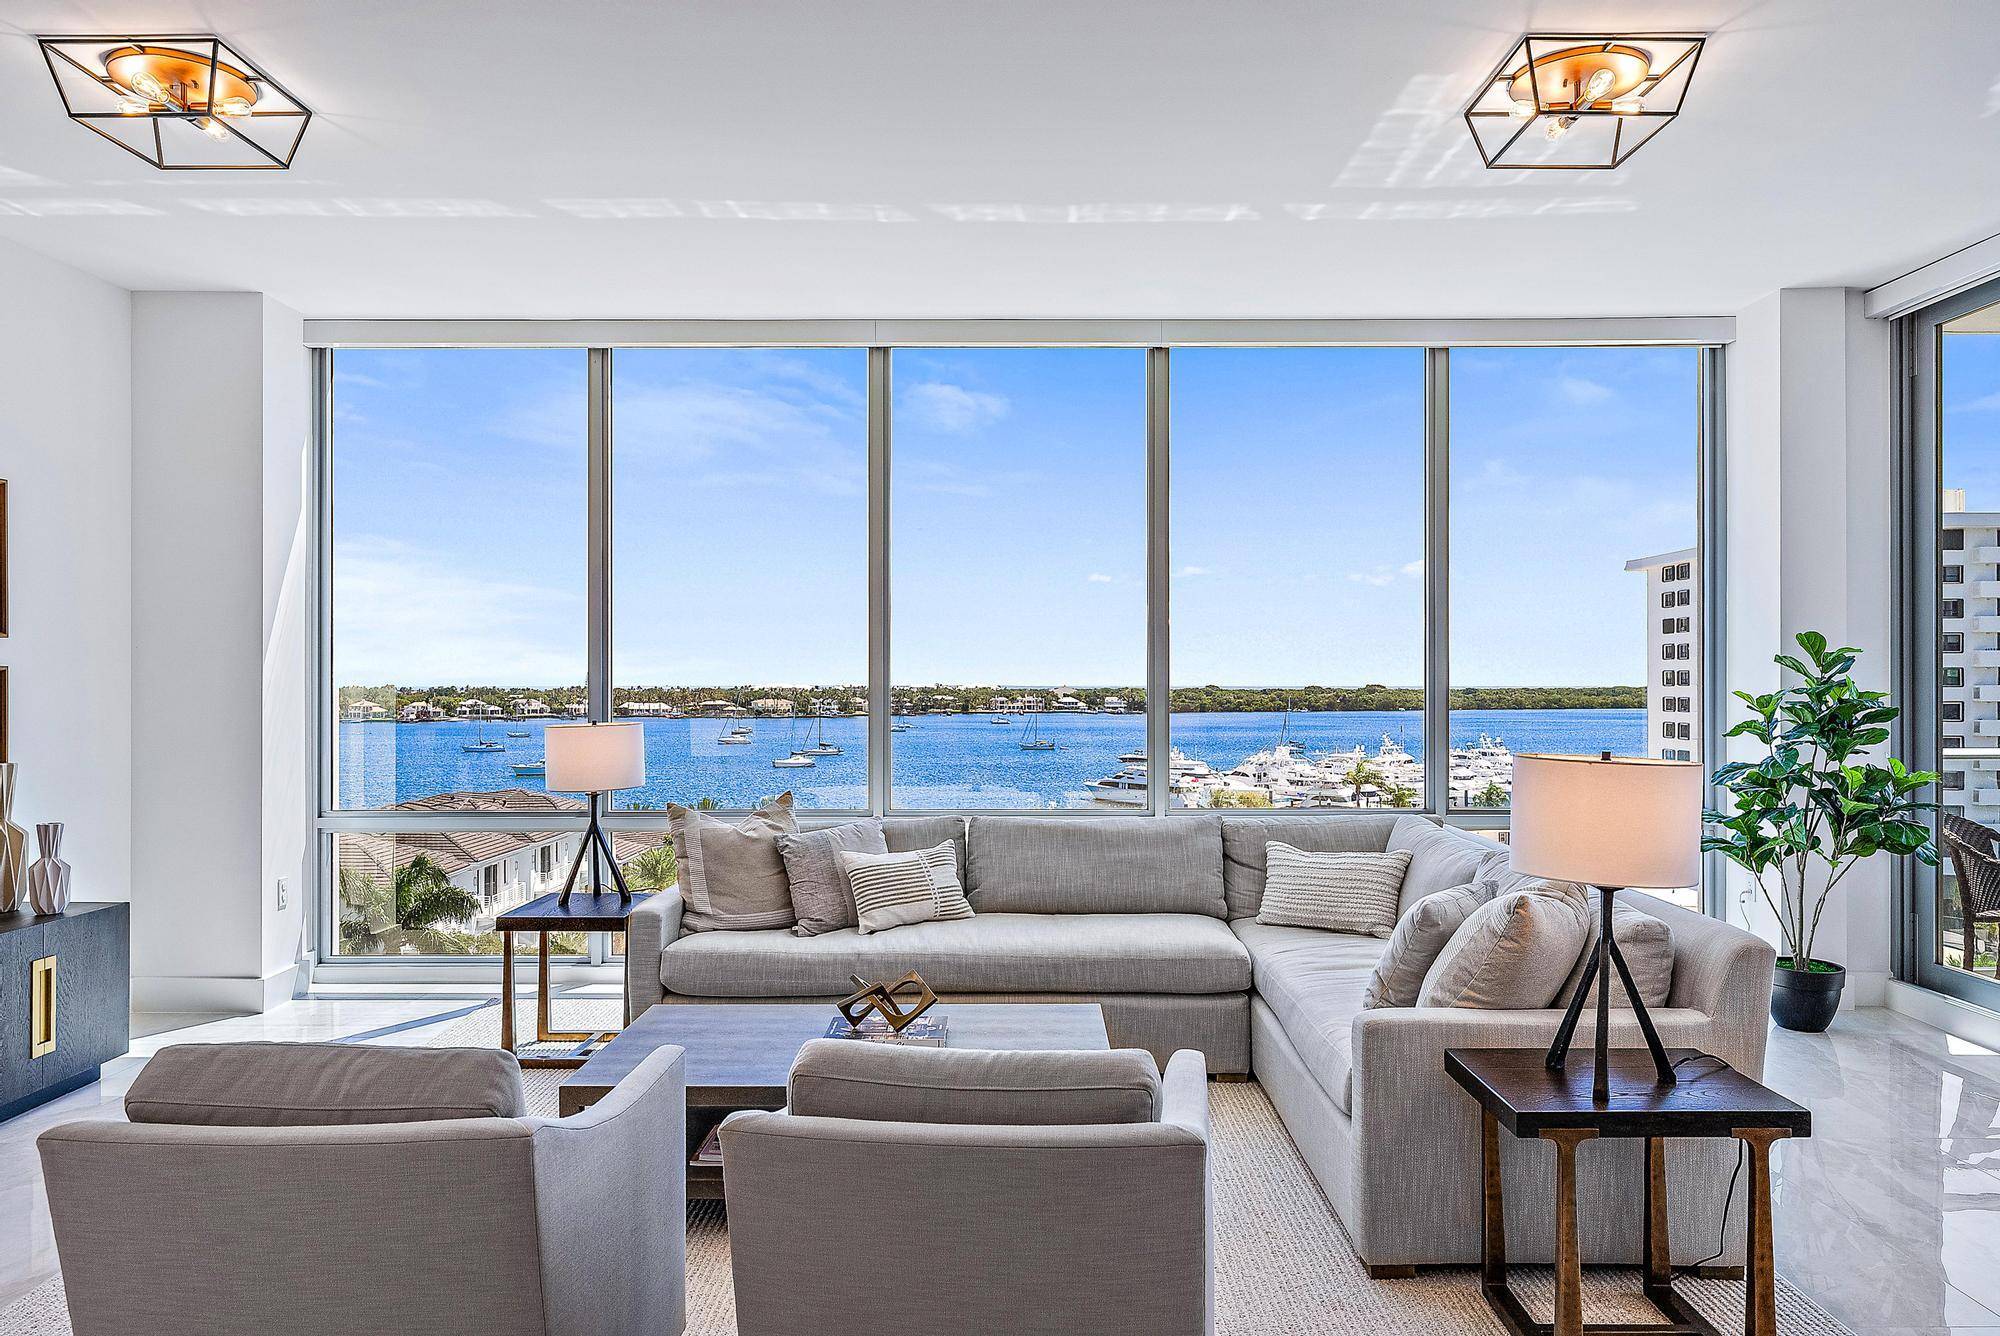 You have arrived at the exclusive Water Club offering the best views in North Palm Beach !